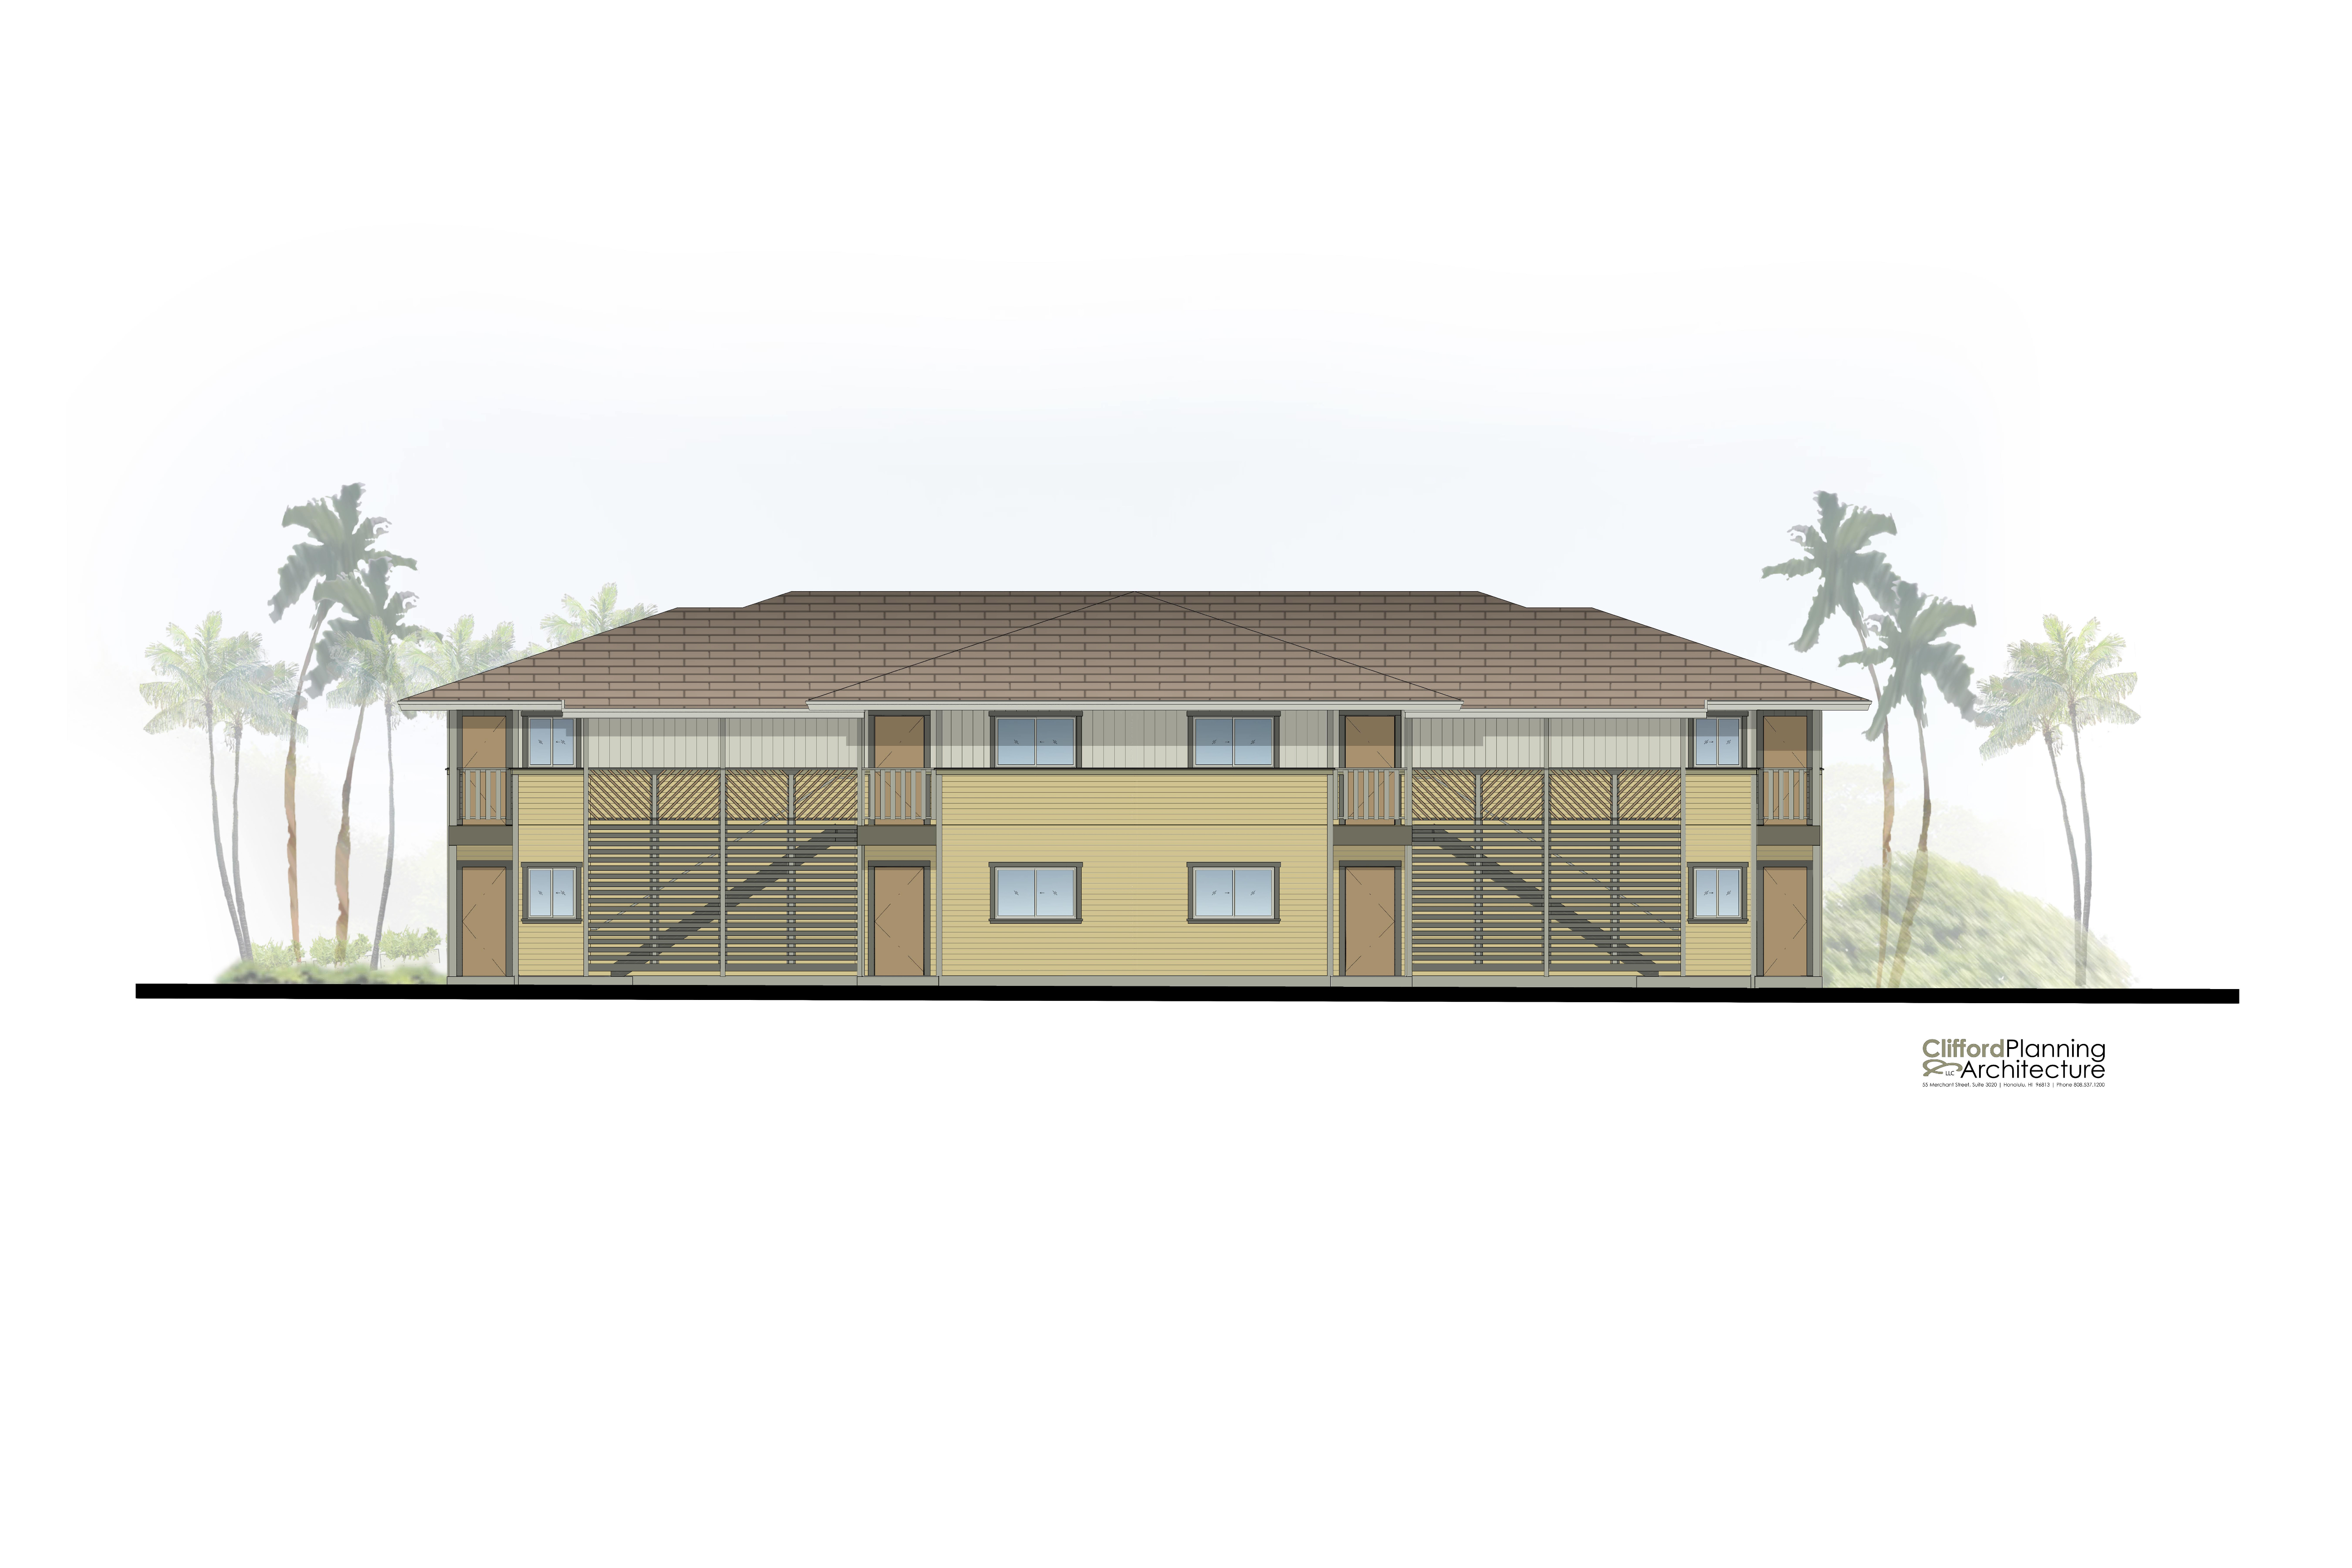 Kulamalu project illustration provided by Clifford Planning & Architecture.